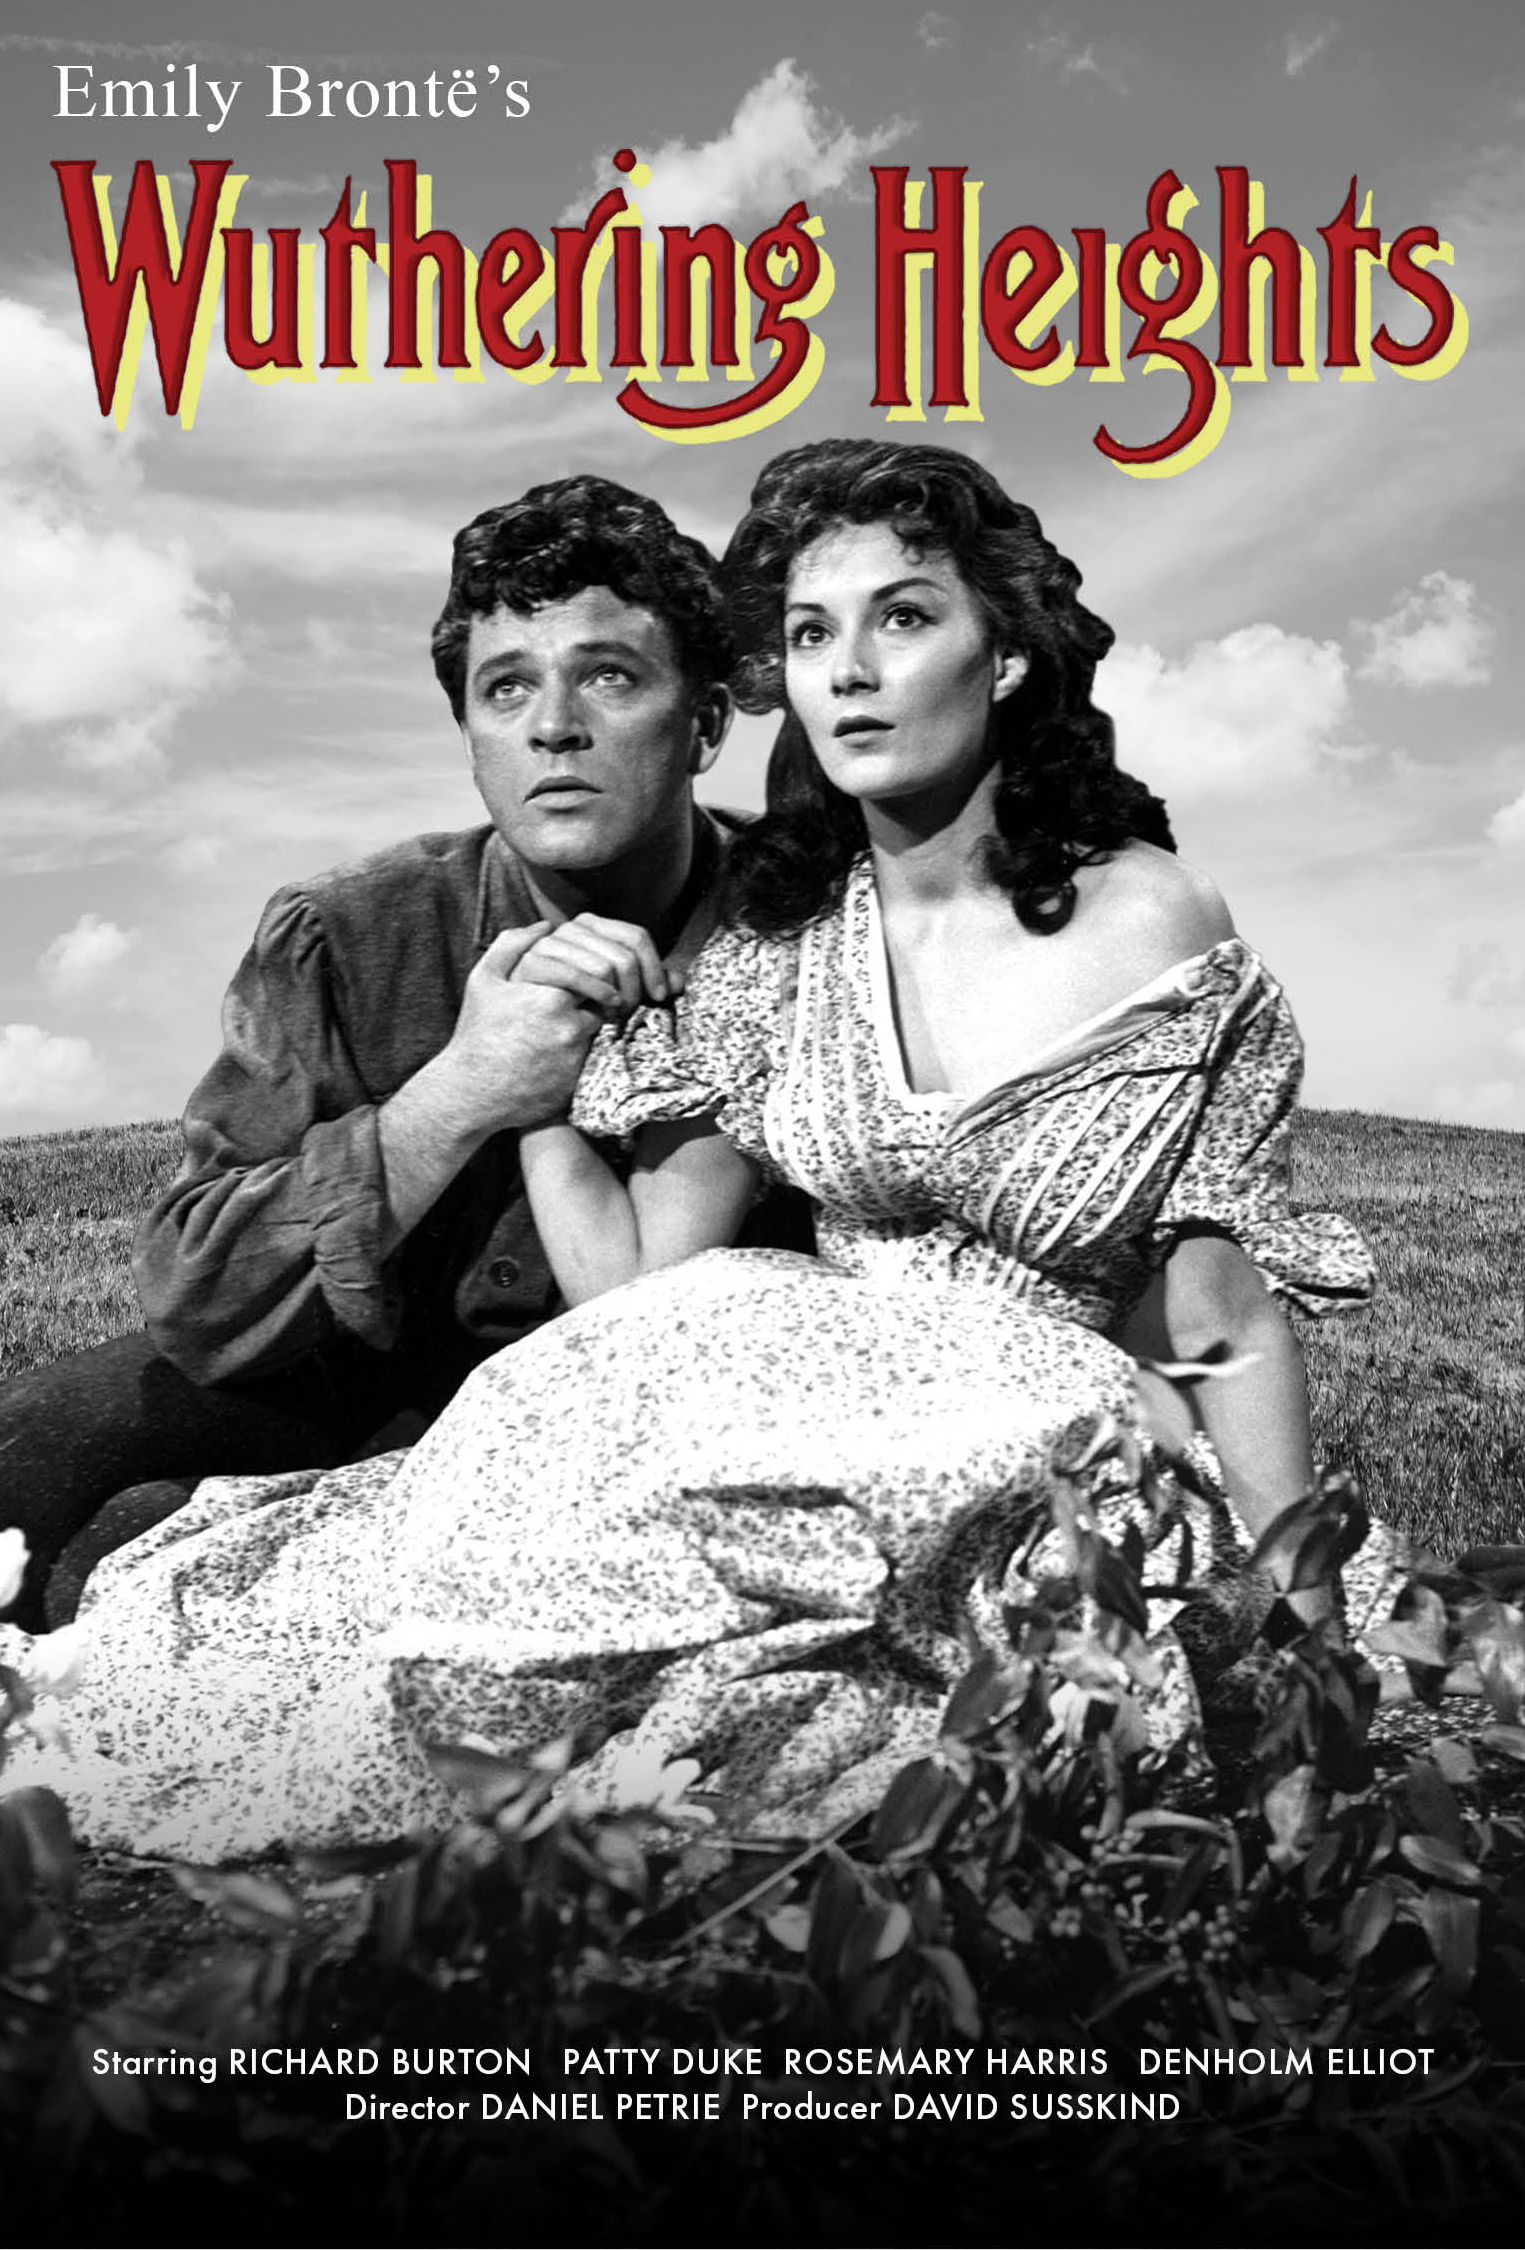 Wuthering Heights (1967) ( (DVD)) 